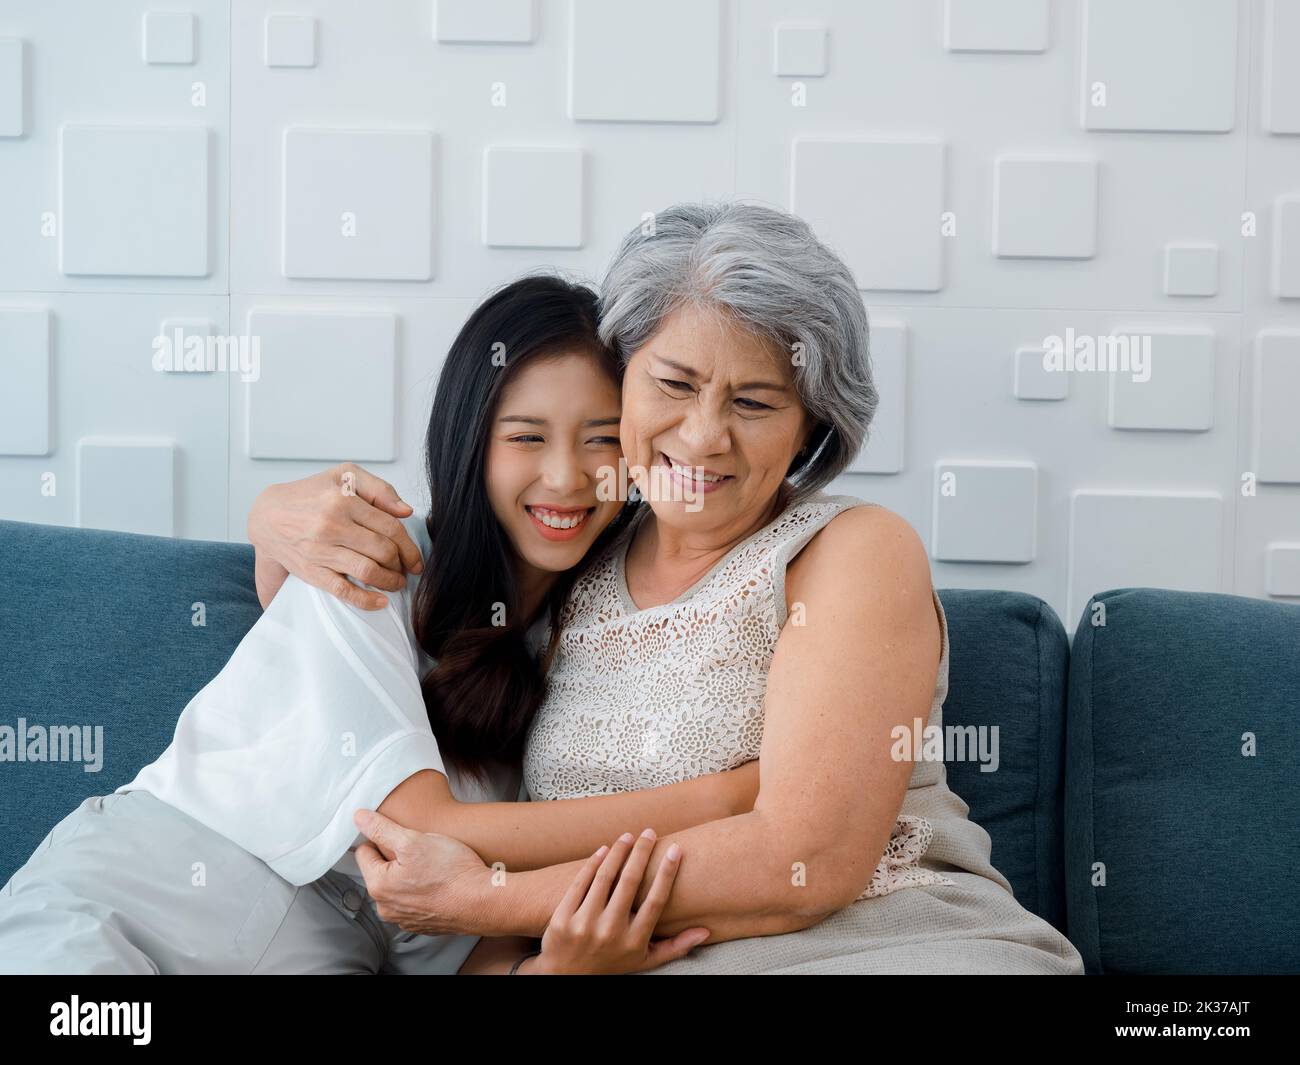 Portrait of happy Asian senior, mother or grandparent white hair embracing her beautiful daughter or grandchild smiling with love, care and comfort wh Stock Photo